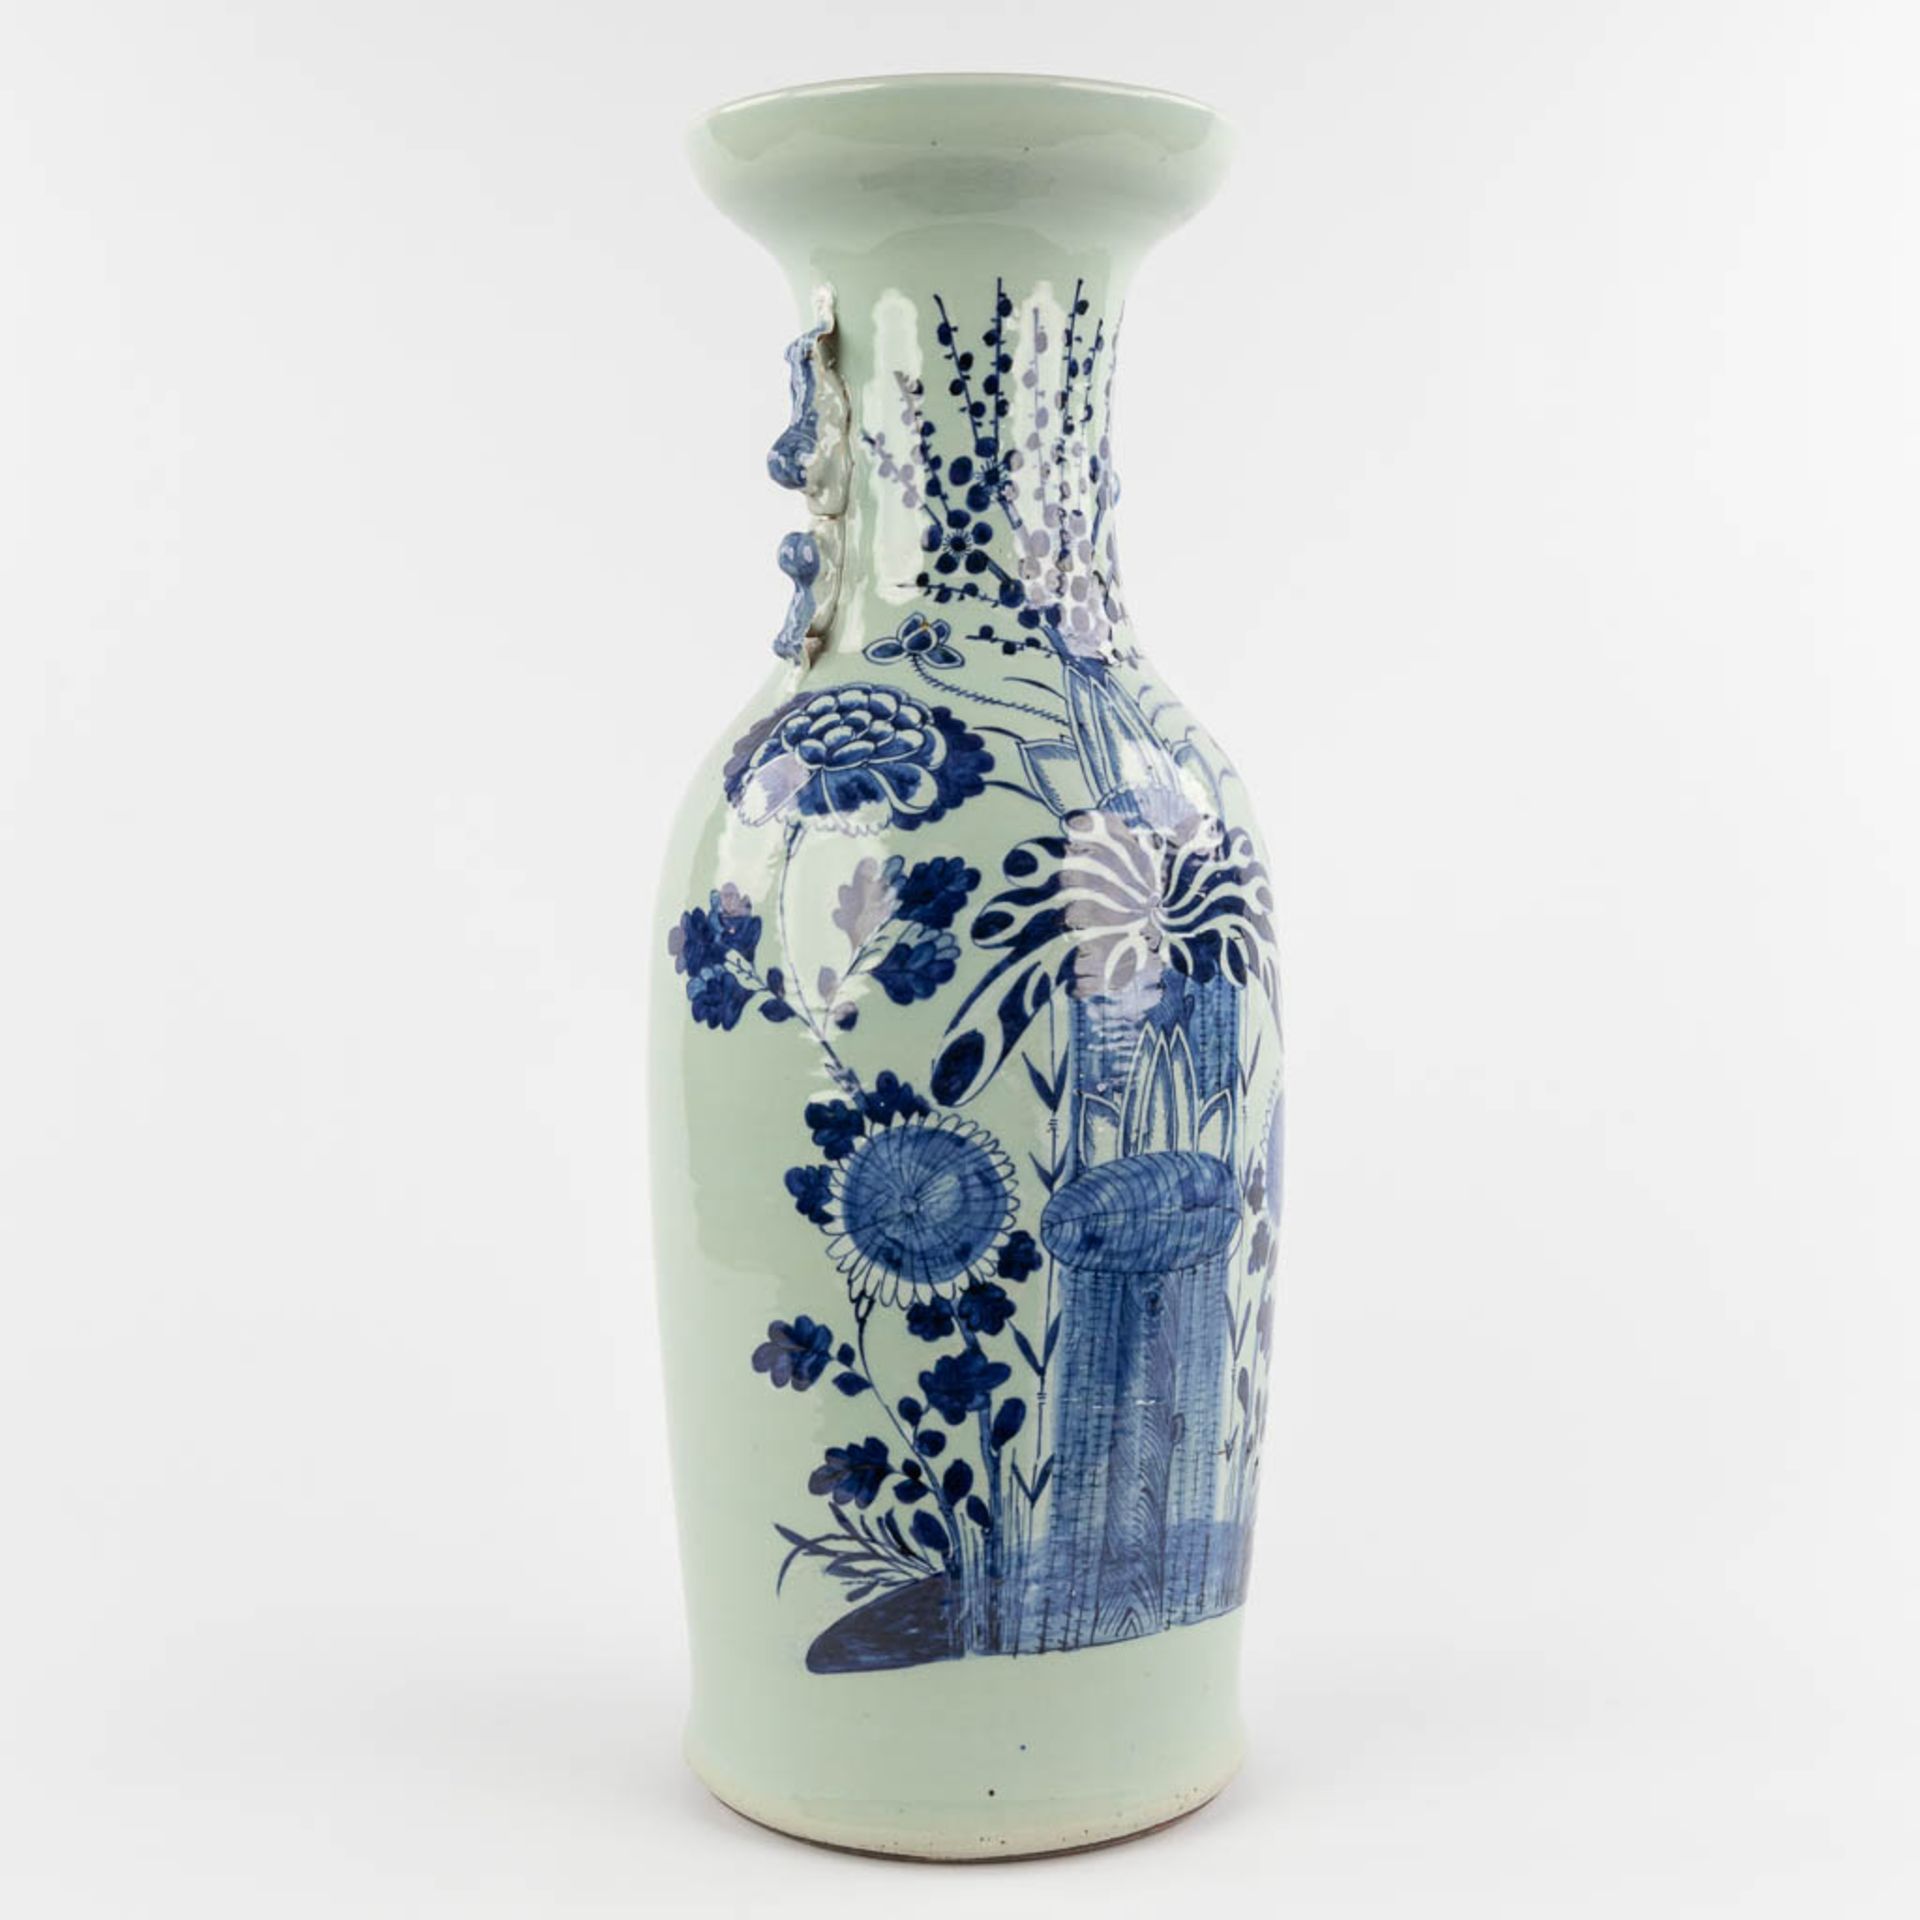 A Chinese Celadon vase with floral decor. 19th/20th C. (H:59 x D:21 cm) - Image 3 of 11